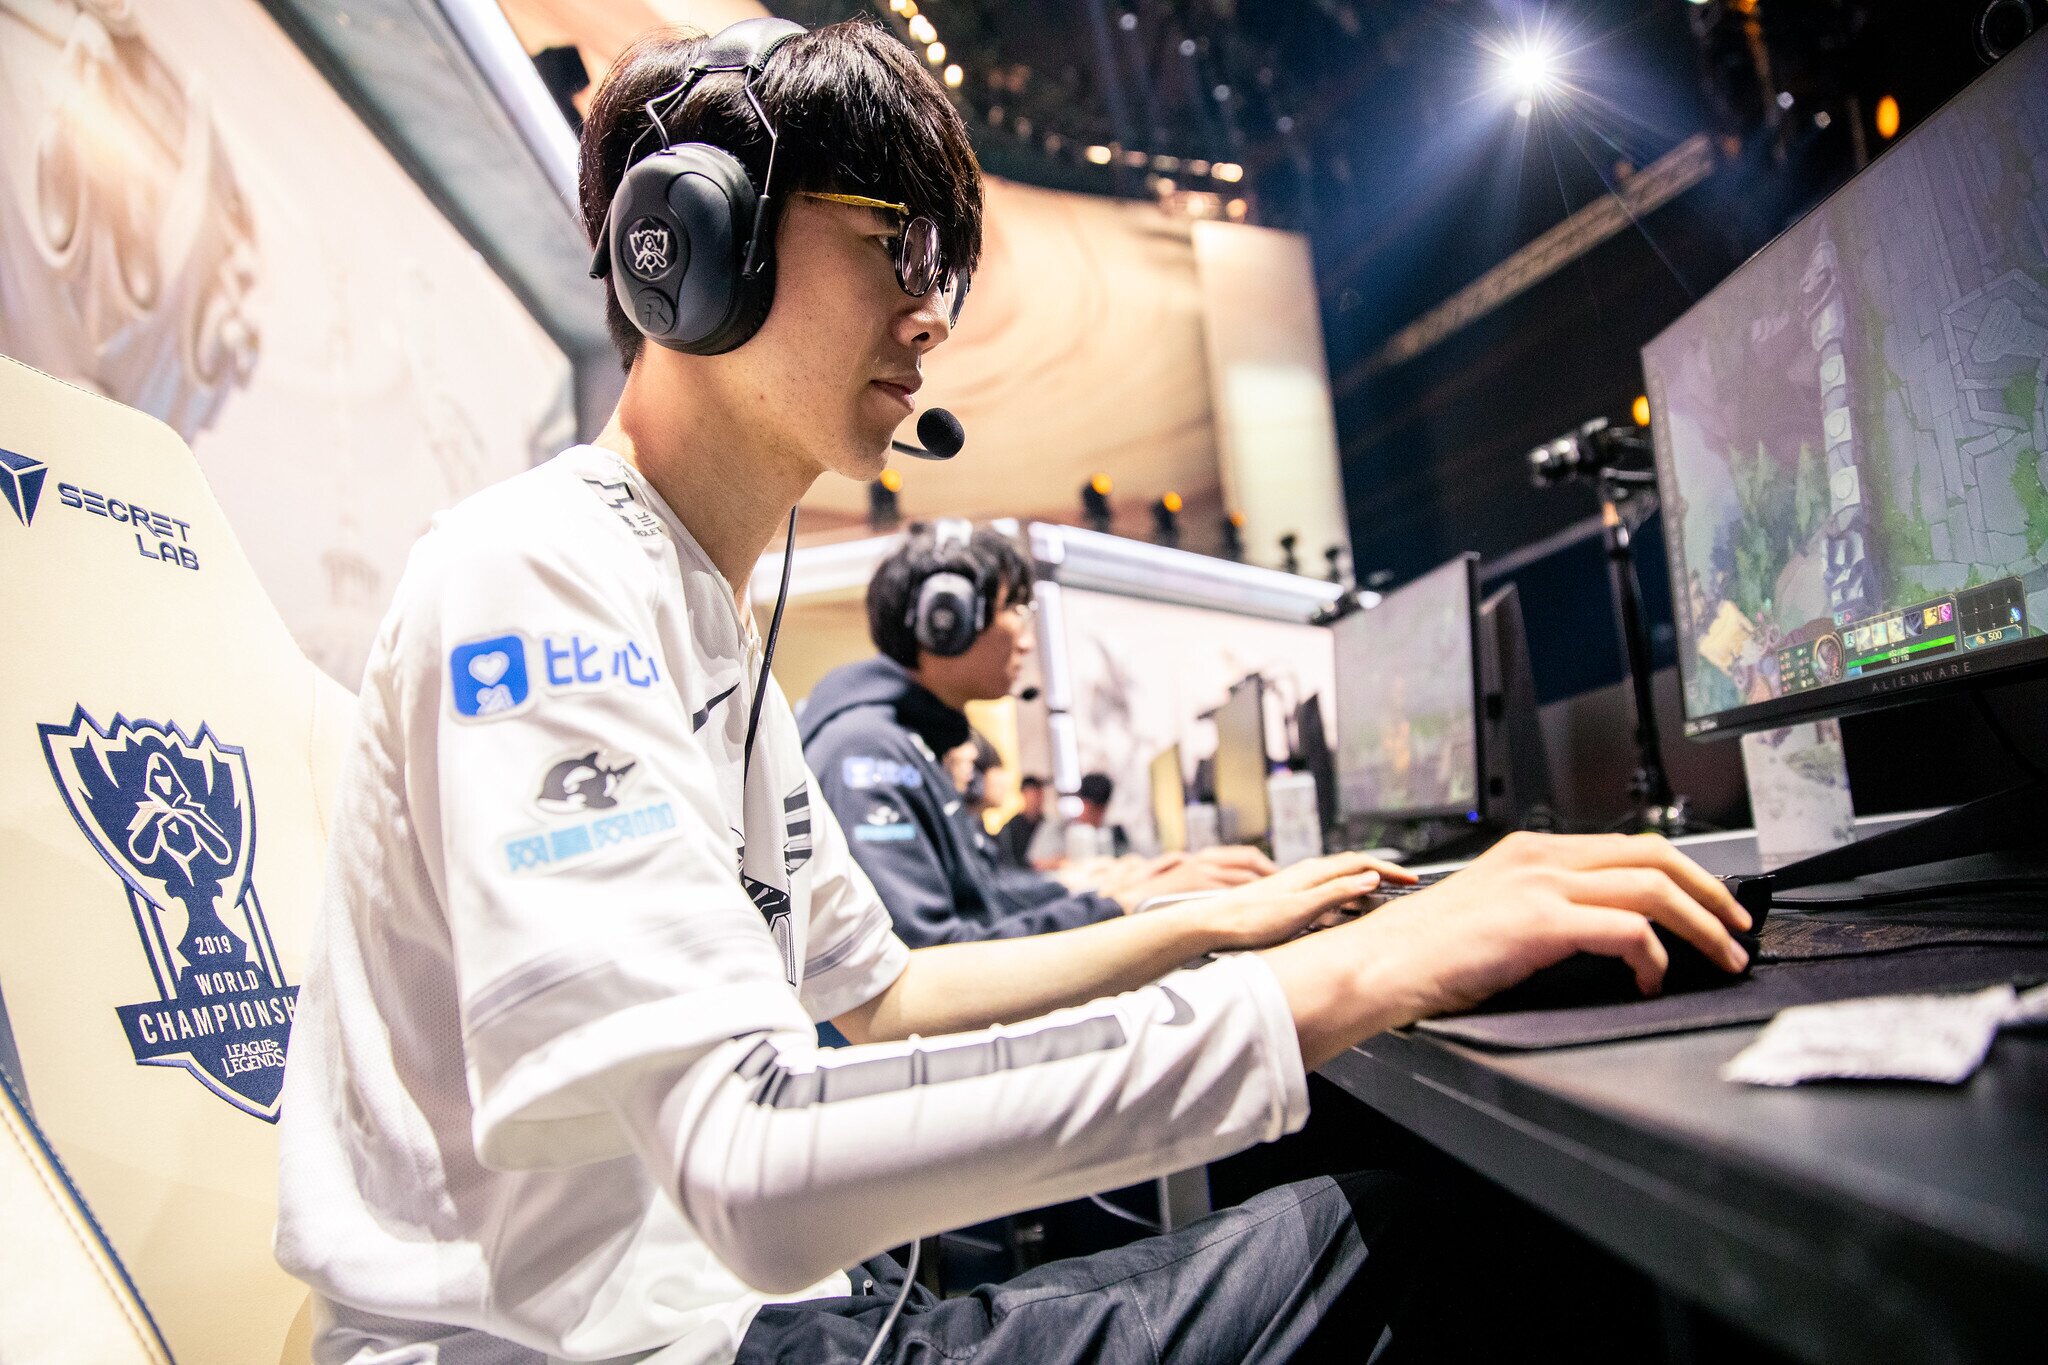 TheShy may be going through an uncharacteristic slump, but Invictus Gaming is still racking up the kills. (Photo via Colin Young-Wolff